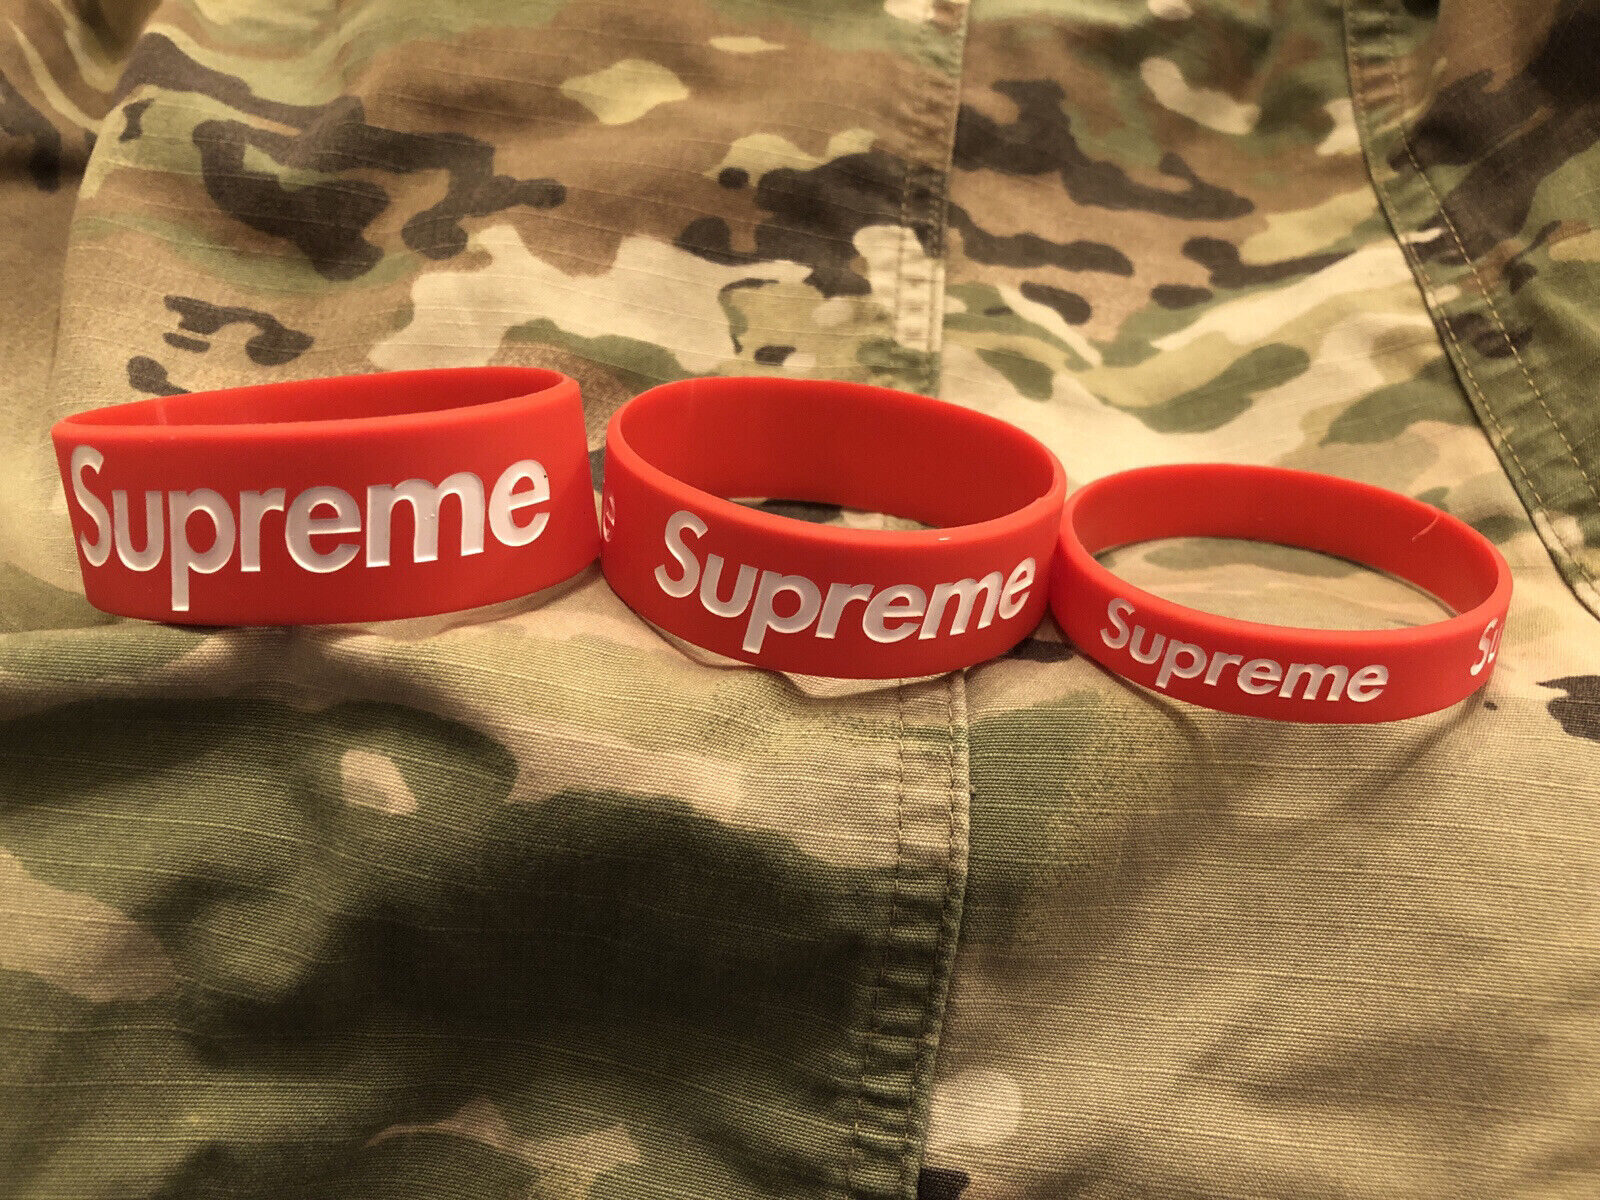 1x SUPREME Silicone Bracelet Set (1in, 3/4in, & 1/2in), Save $2.50 From Retail